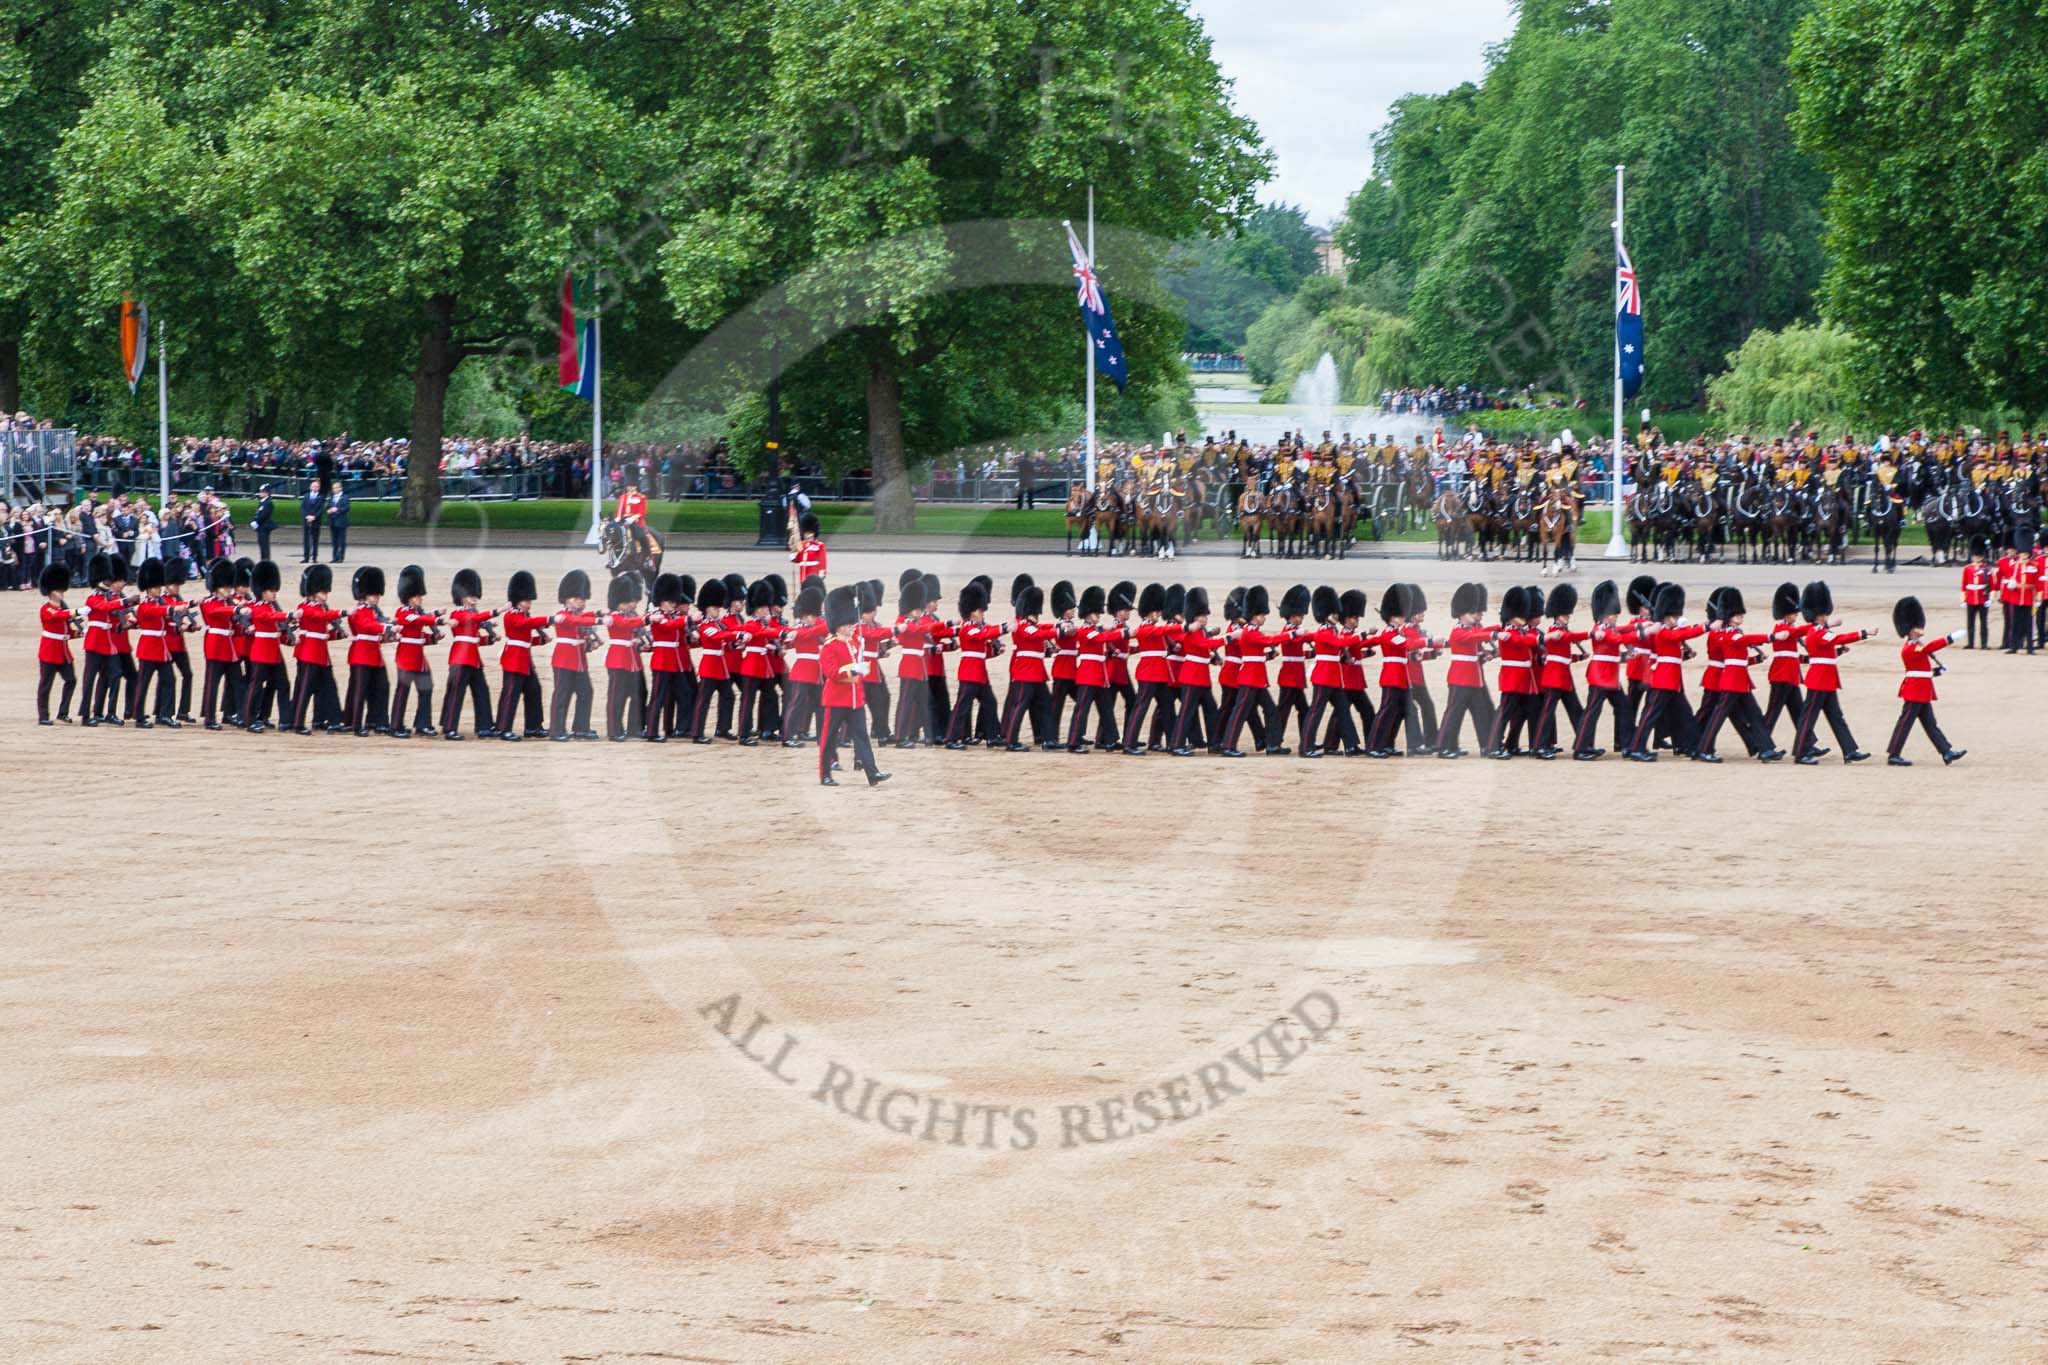 Trooping the Colour 2013: The men of No. 1 Guard (Escort for the Colour),1st Battalion Welsh Guards have turned right and are about to form a new line. Image #438, 15 June 2013 11:17 Horse Guards Parade, London, UK